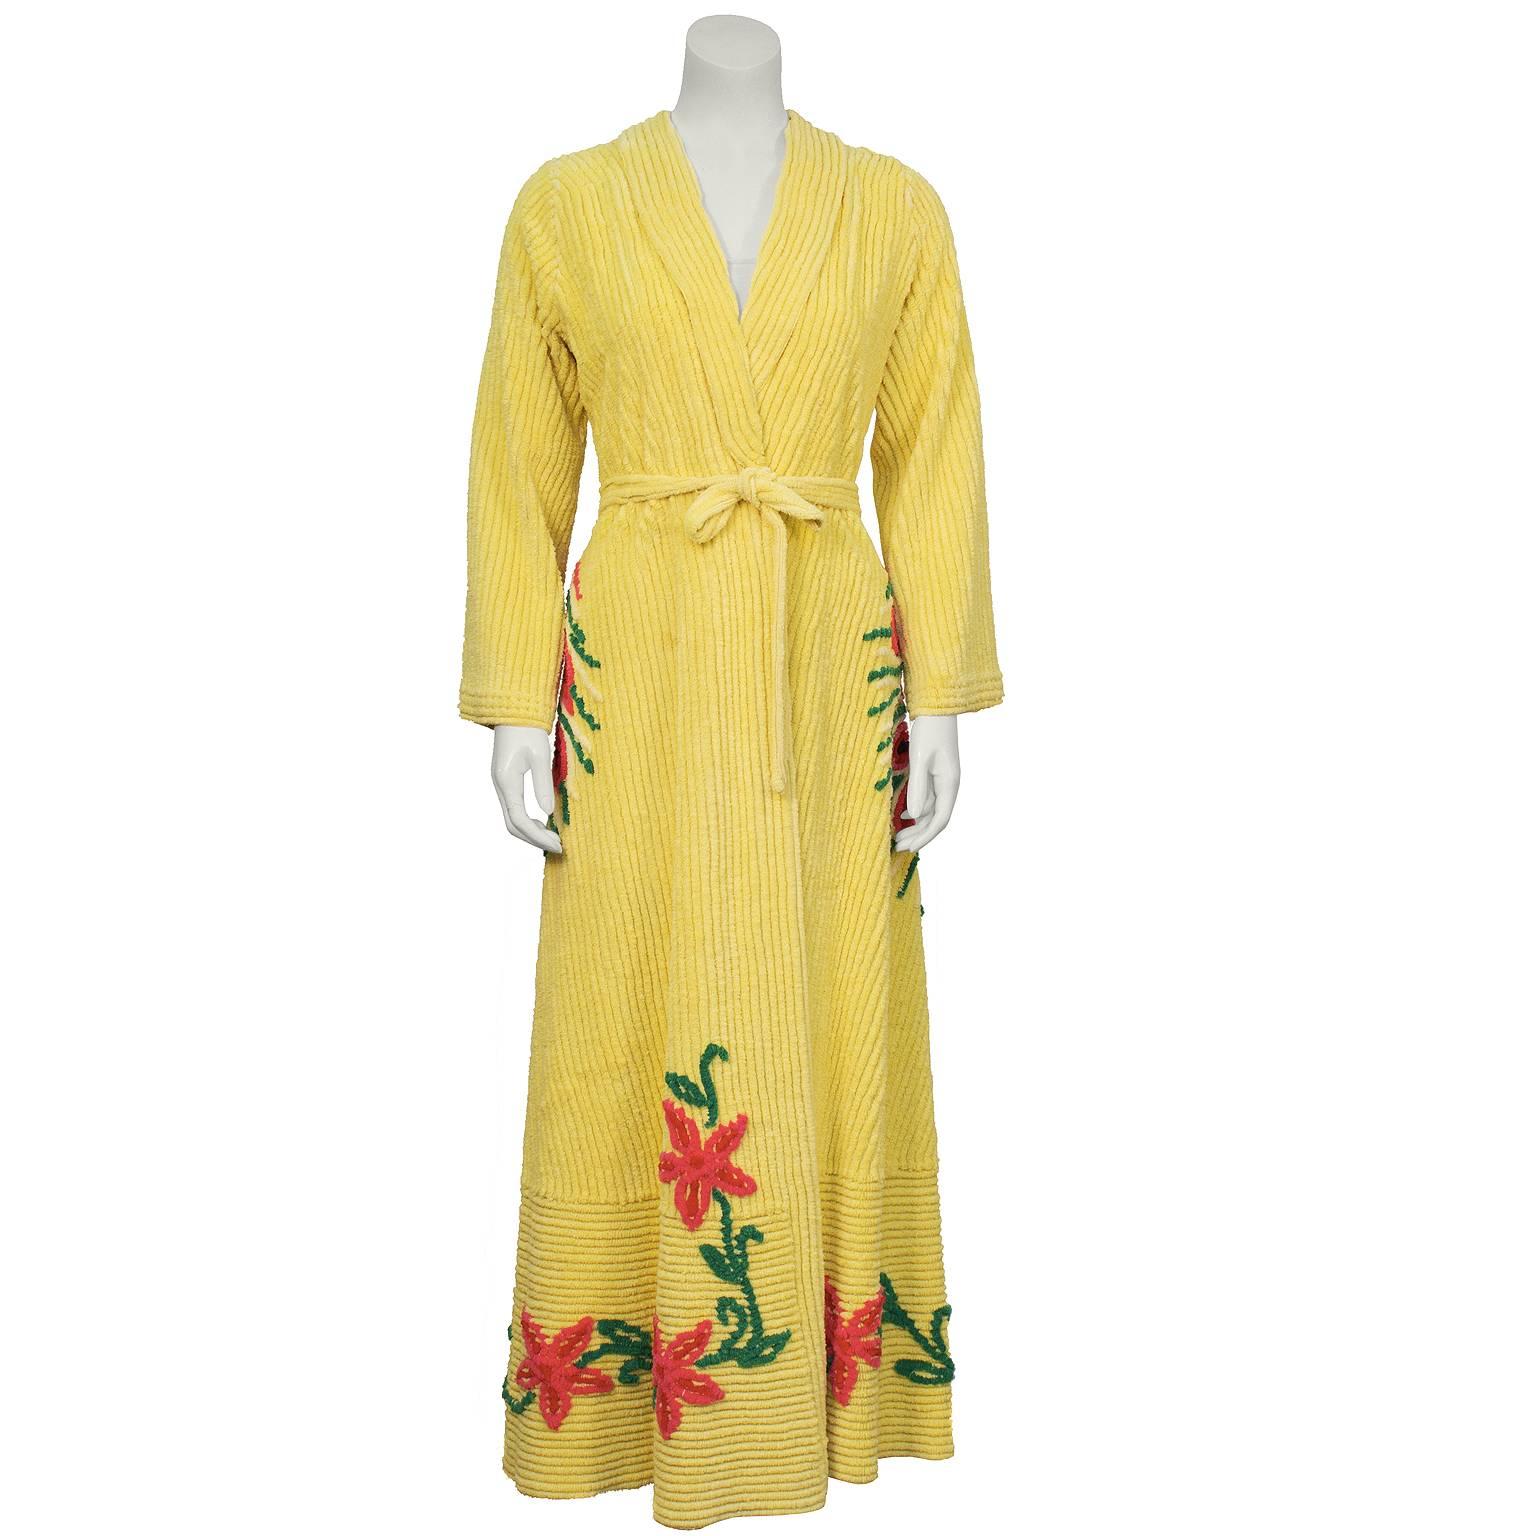 The most fashionable and sought after of the 1950's housecoats. A yellow chenille robe both comfortable and stylish. Think 